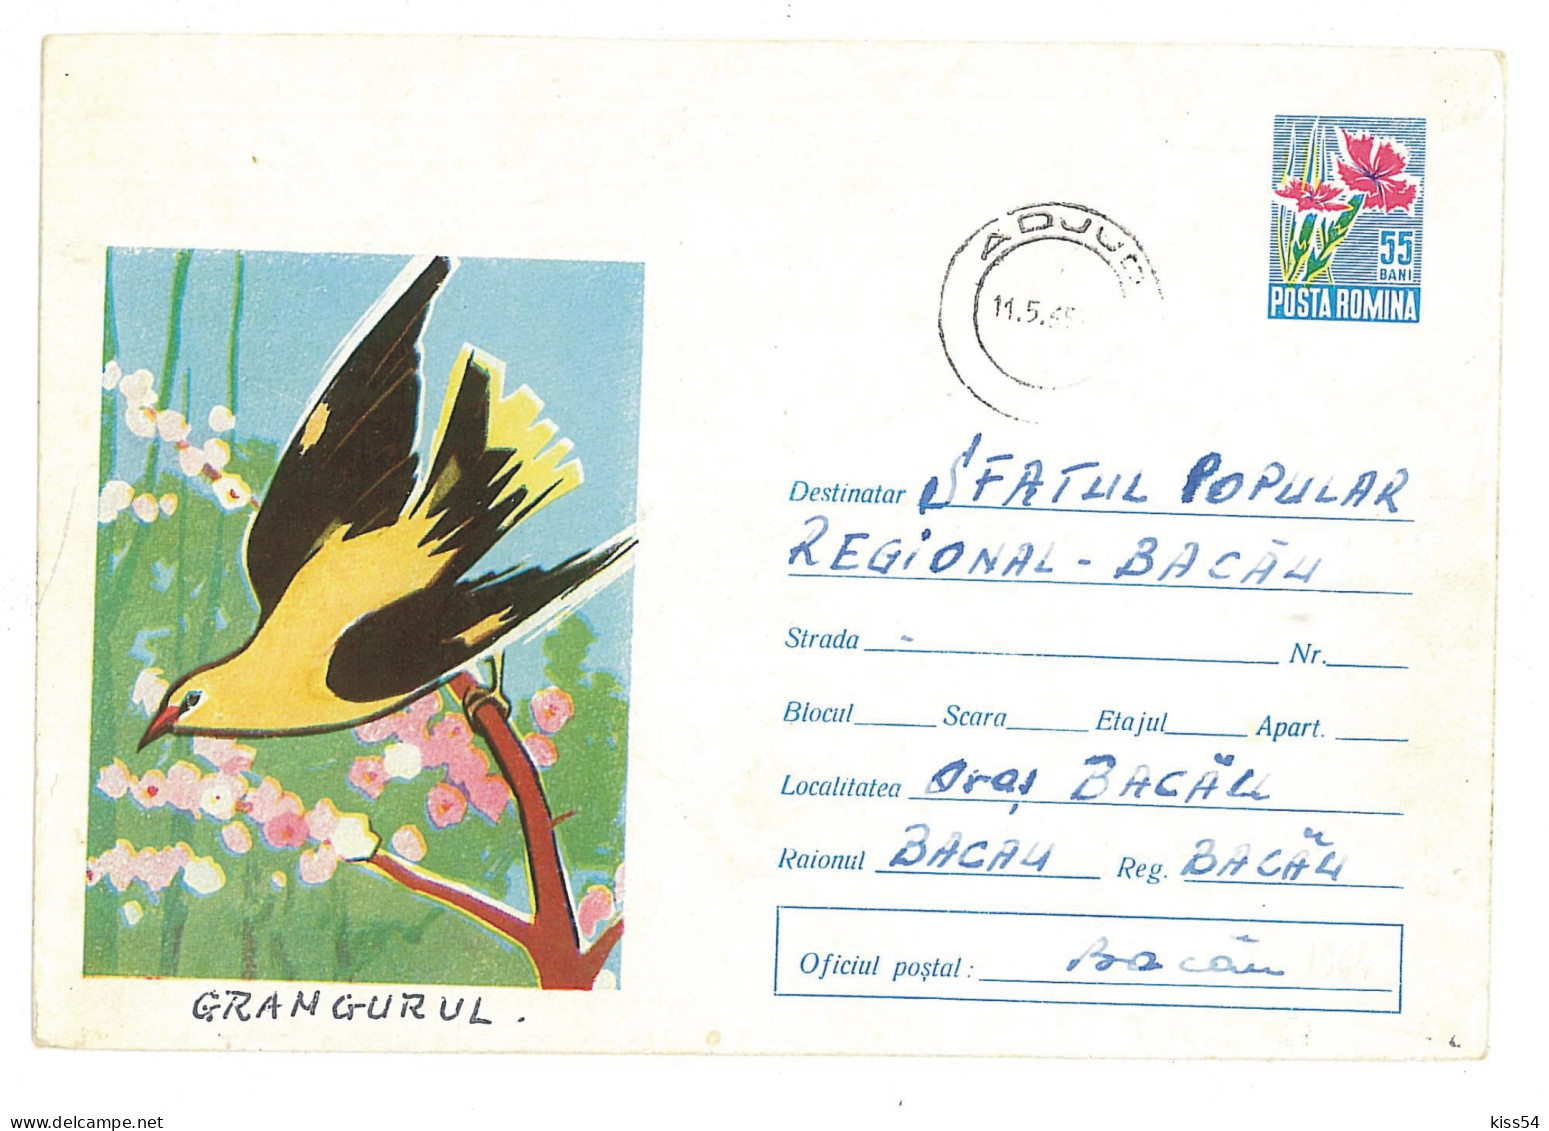 IP 64 A - 0201b Bird, ORIOLE, Romania - Stationery - Used - 1964 - Pics & Grimpeurs